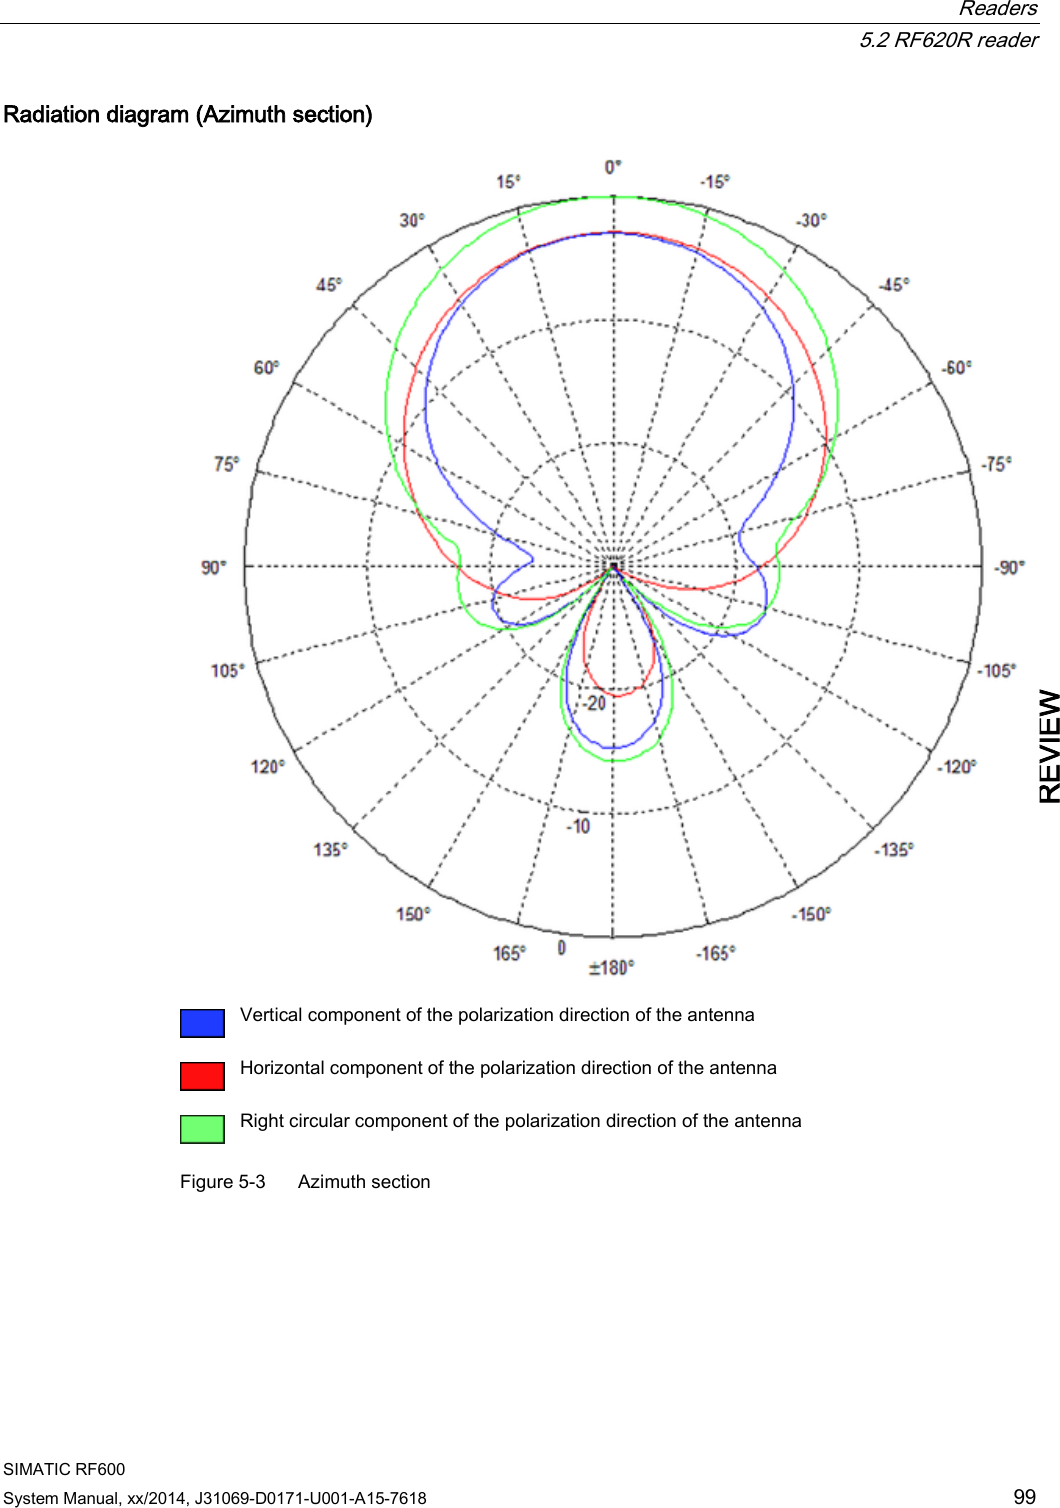  Readers  5.2 RF620R reader SIMATIC RF600 System Manual, xx/2014, J31069-D0171-U001-A15-7618 99 REVIEW Radiation diagram (Azimuth section)   Vertical component of the polarization direction of the antenna  Horizontal component of the polarization direction of the antenna  Right circular component of the polarization direction of the antenna Figure 5-3  Azimuth section 